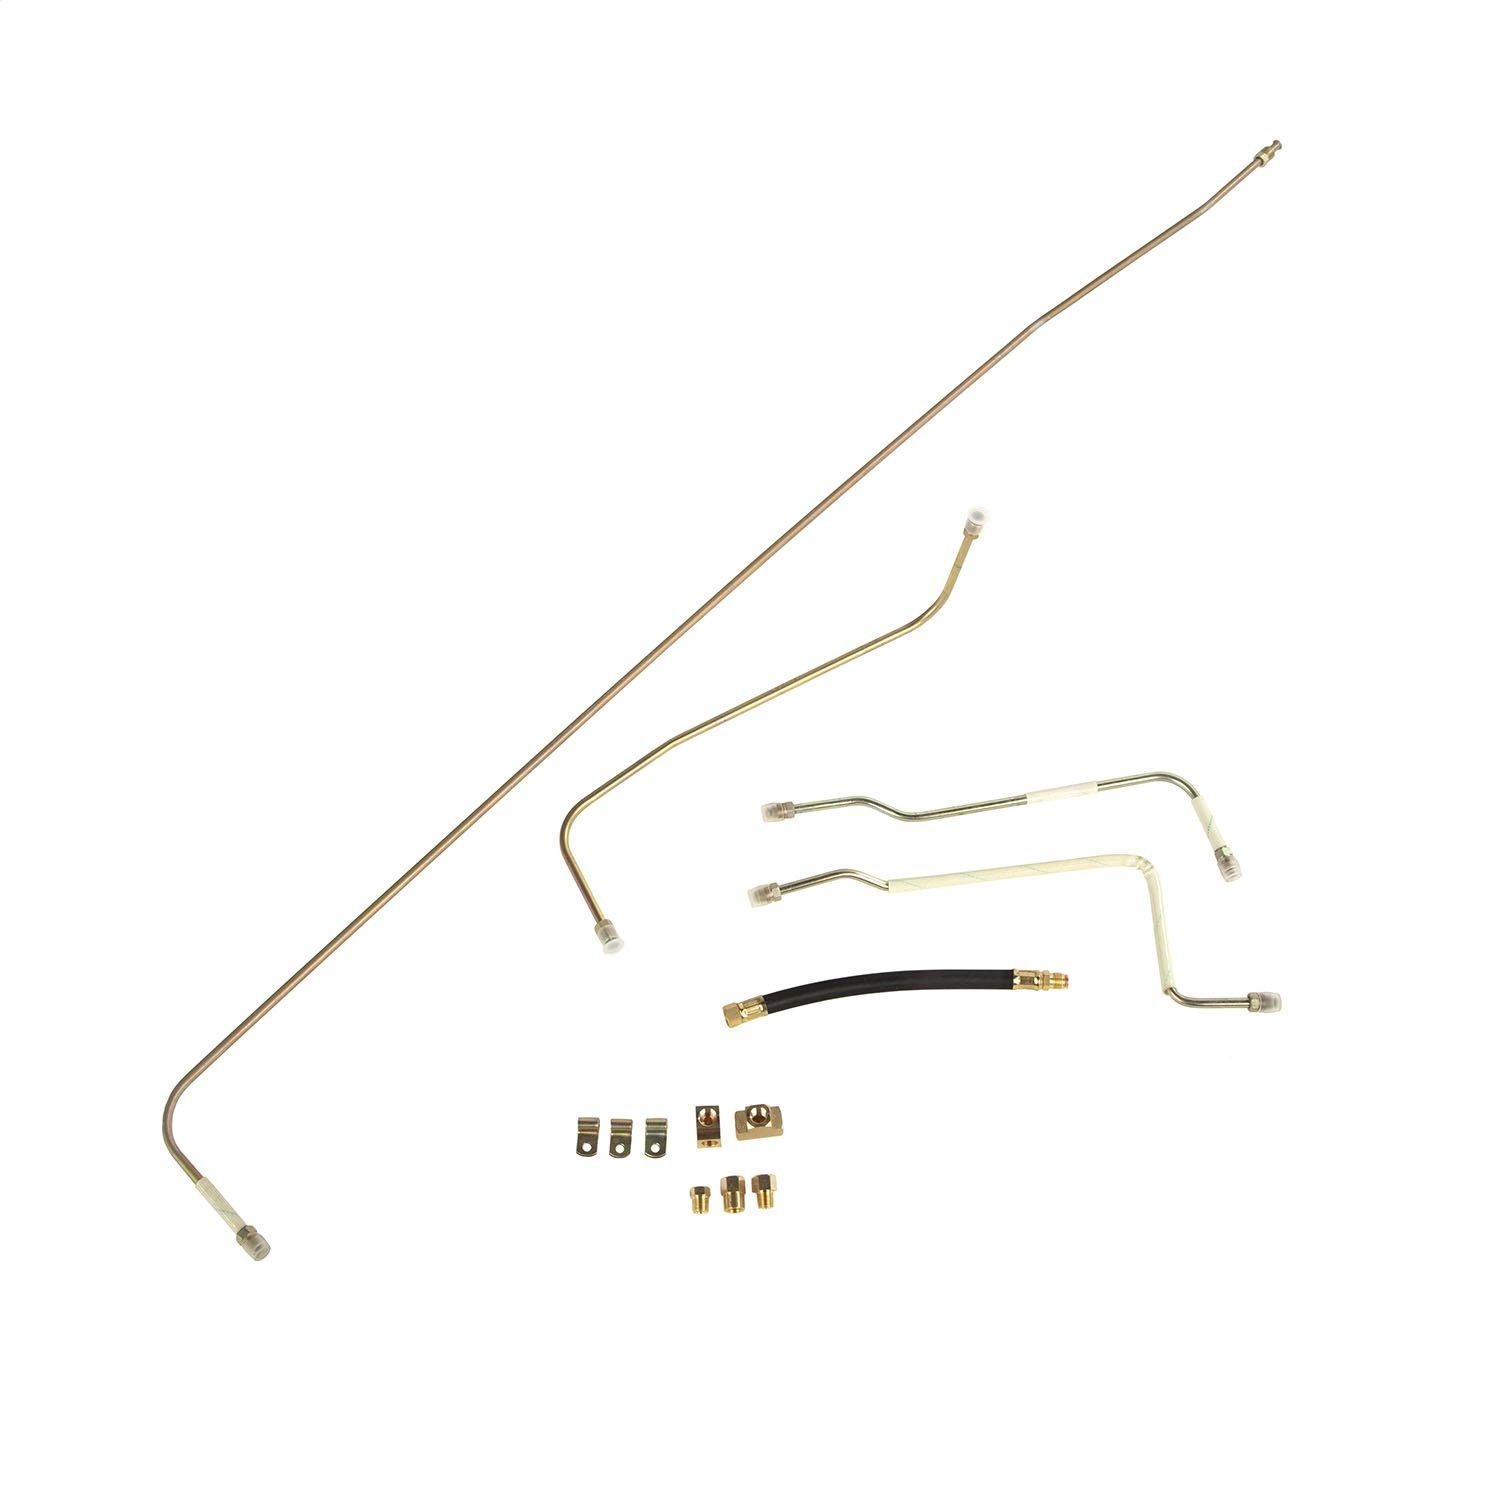 Replacement fuel line set from Omix-ADA, Fits 50-52 Willys M38s.